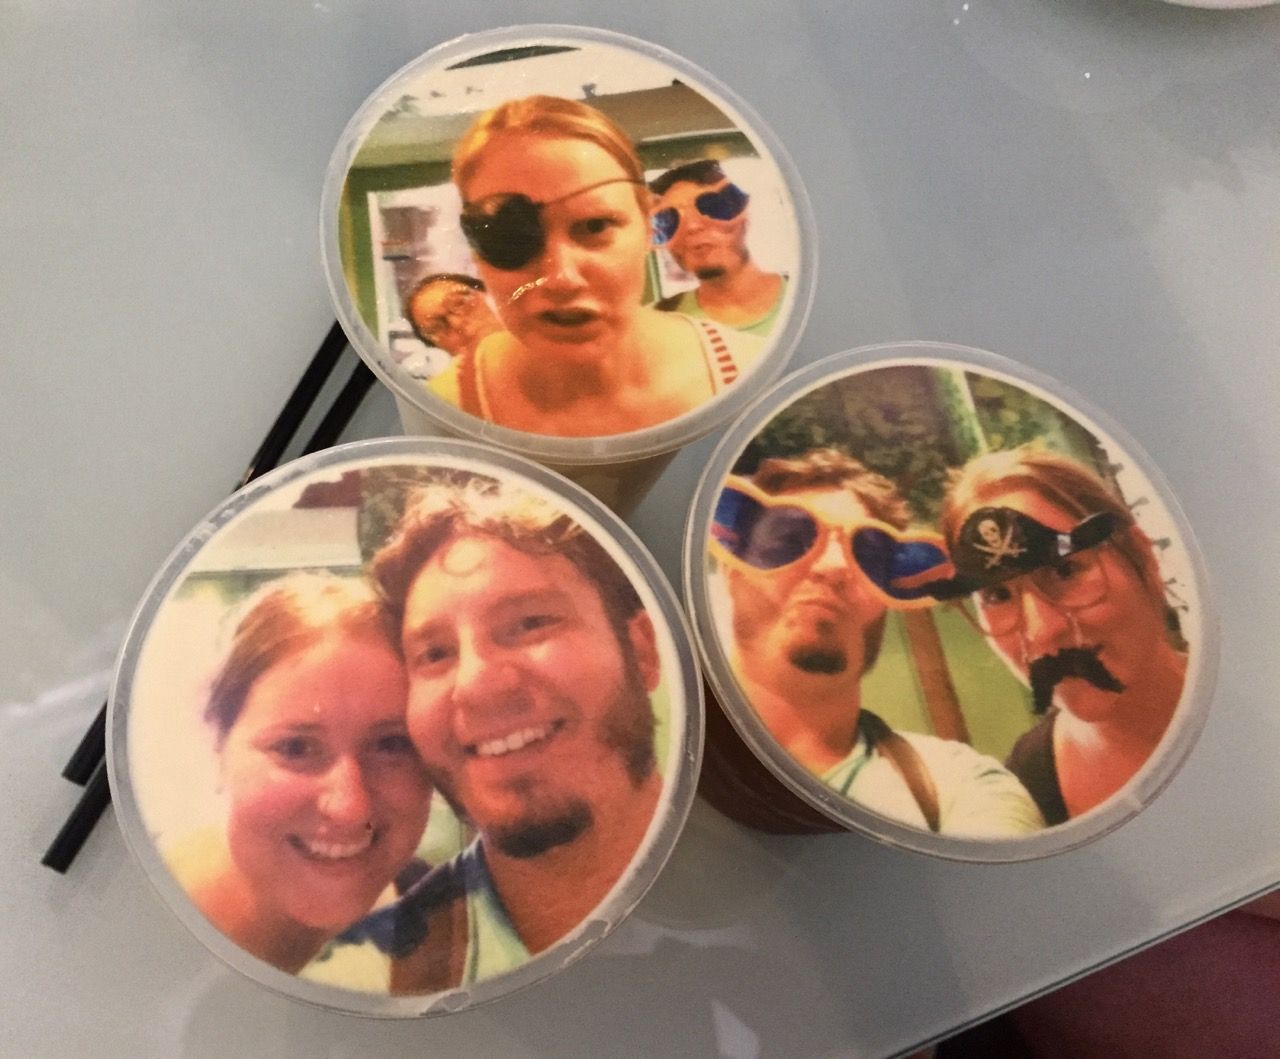 Iced coffee drinks with photos printed on the milk foam.